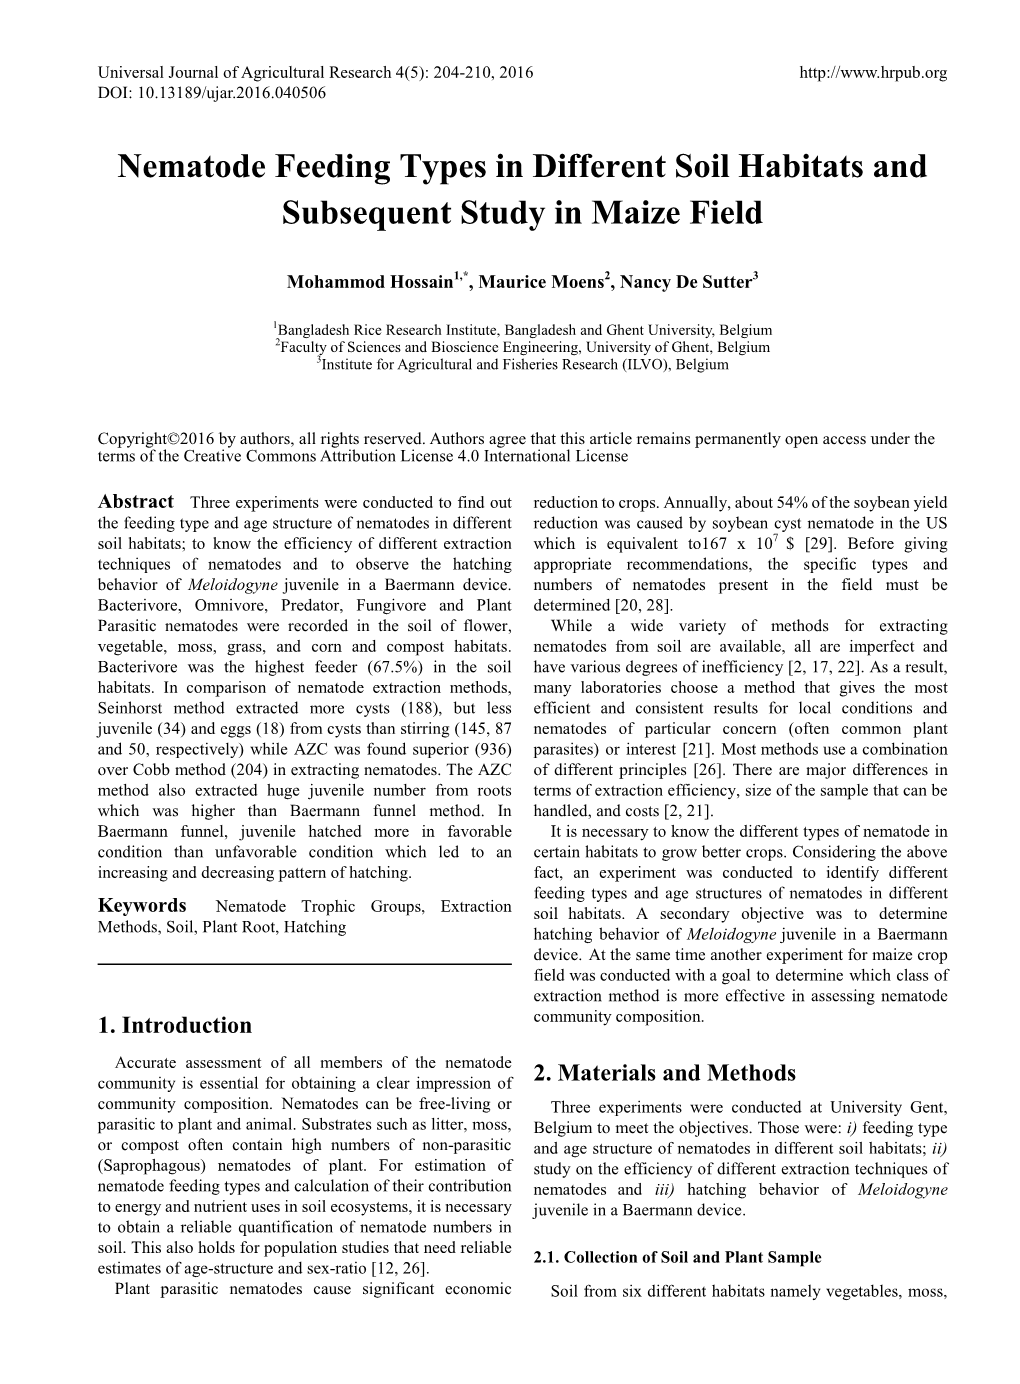 Nematode Feeding Types in Different Soil Habitats and Subsequent Study in Maize Field